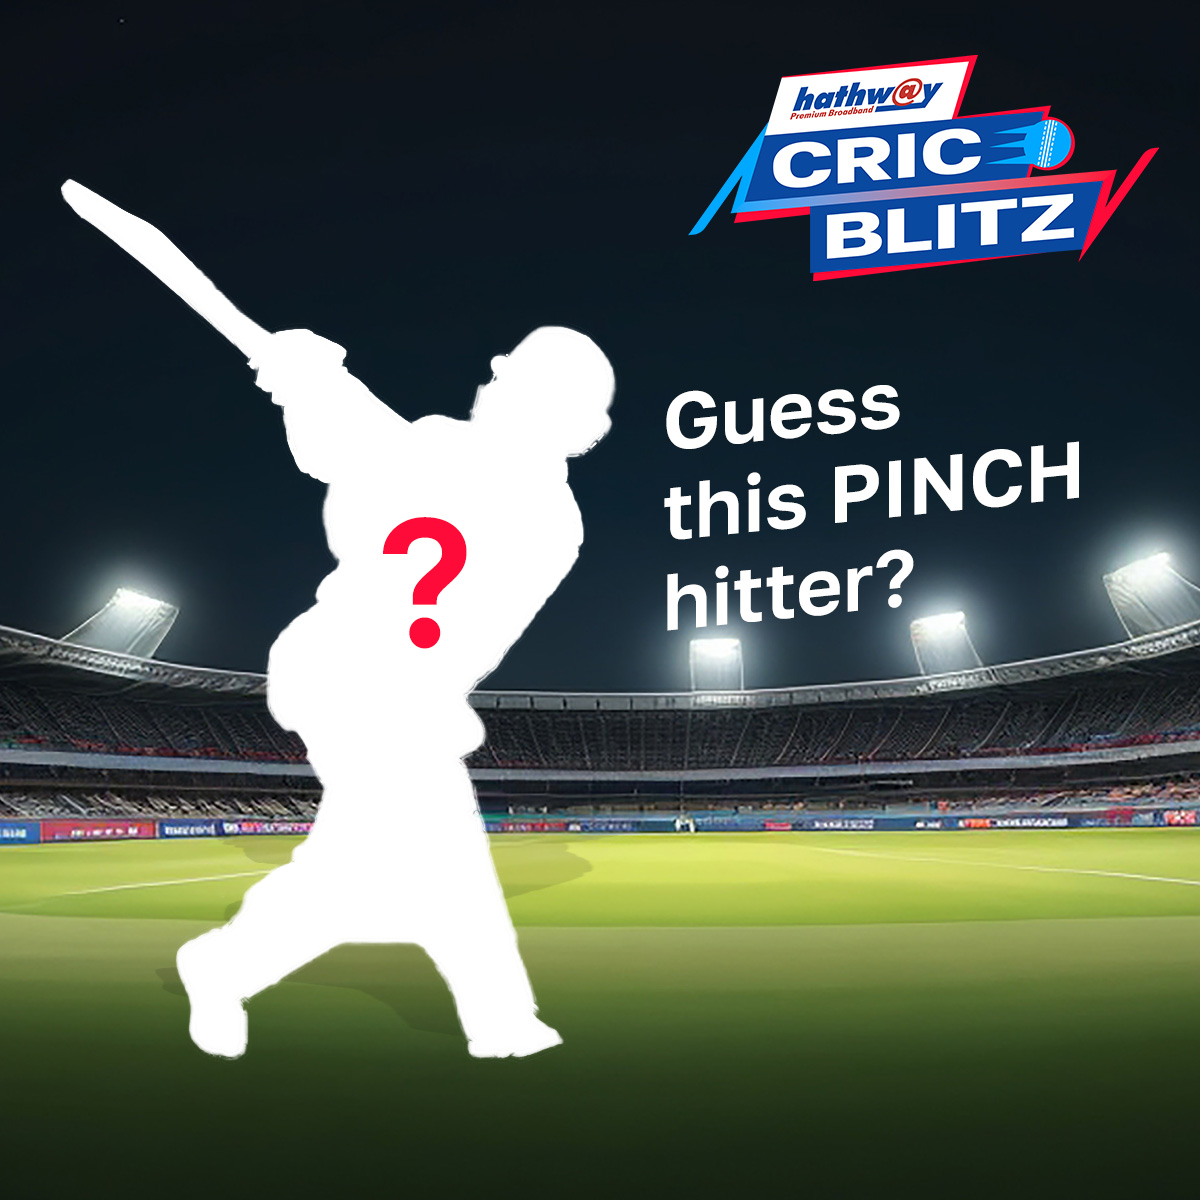 Can you guess this pinch hitter? Hint: Made a comeback from a road accident #Hathway #HathwayBroadband #CricBlitz #T20I #CricketQuiz #Contest #CricketLover #HighSpeed #InternetConnection